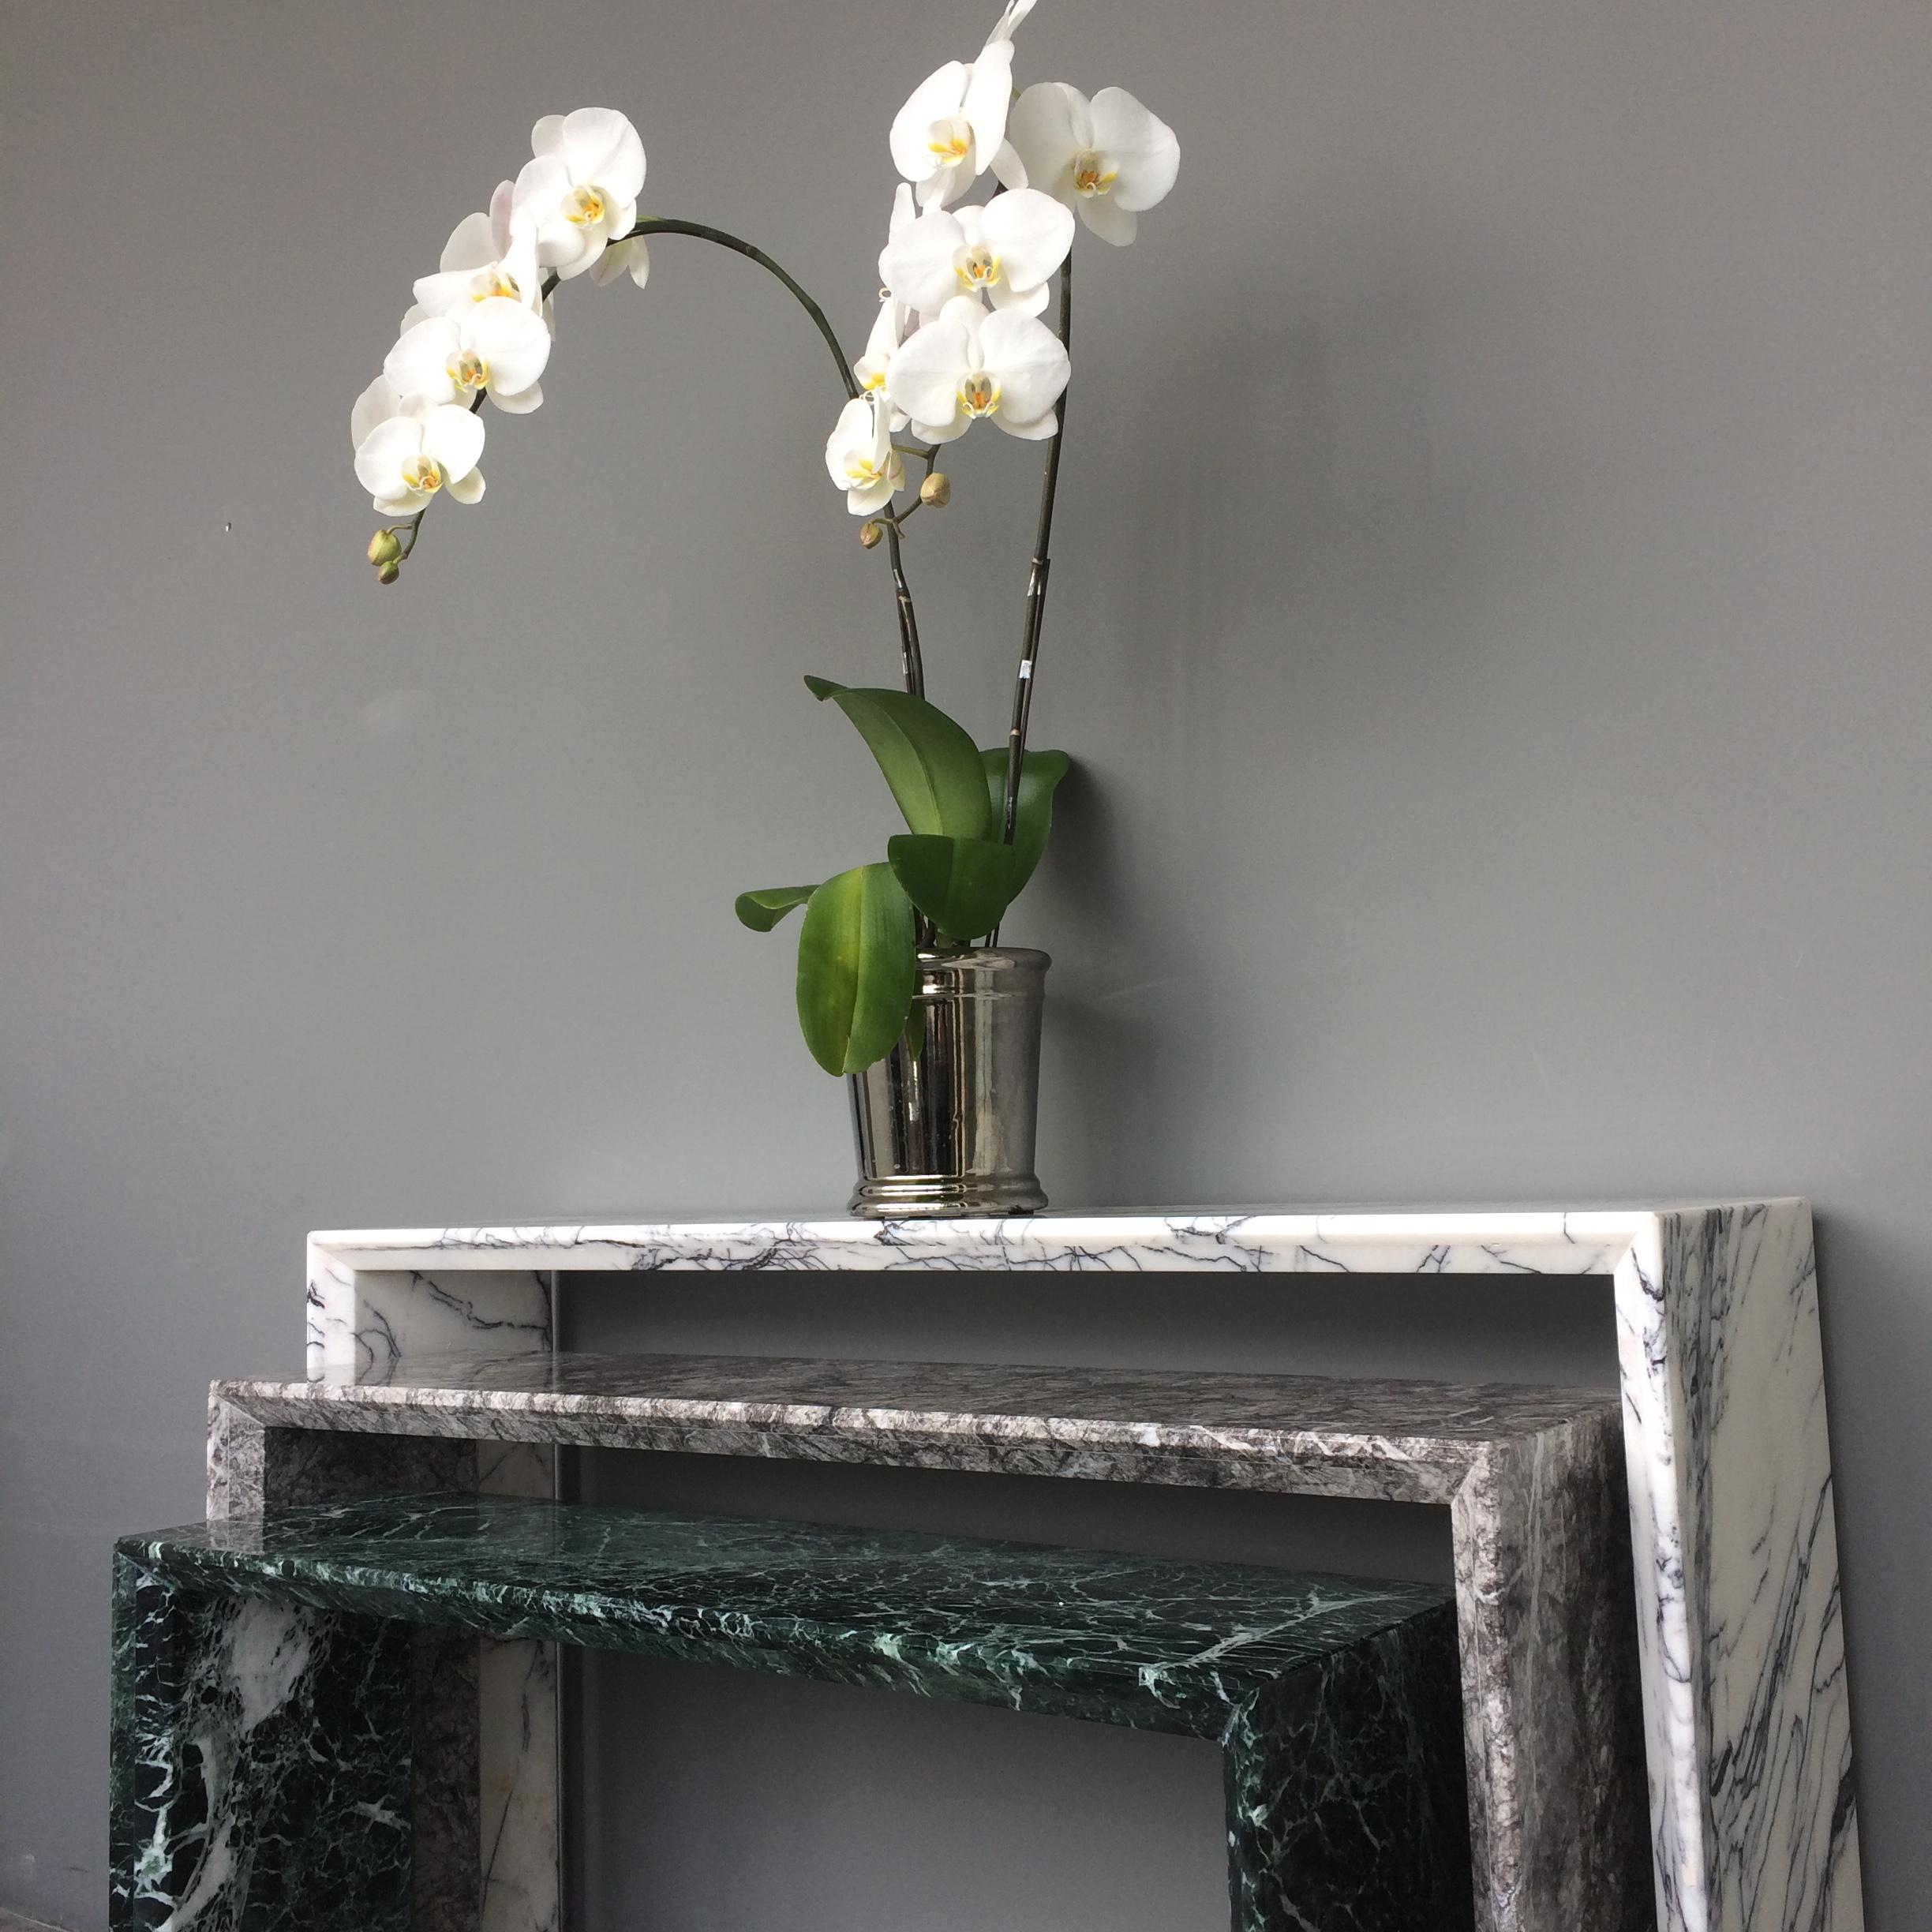 NORDST MARINA Console Table, Italian White Mountain Marble, Danish Modern Design In New Condition For Sale In Rungsted Kyst, DK